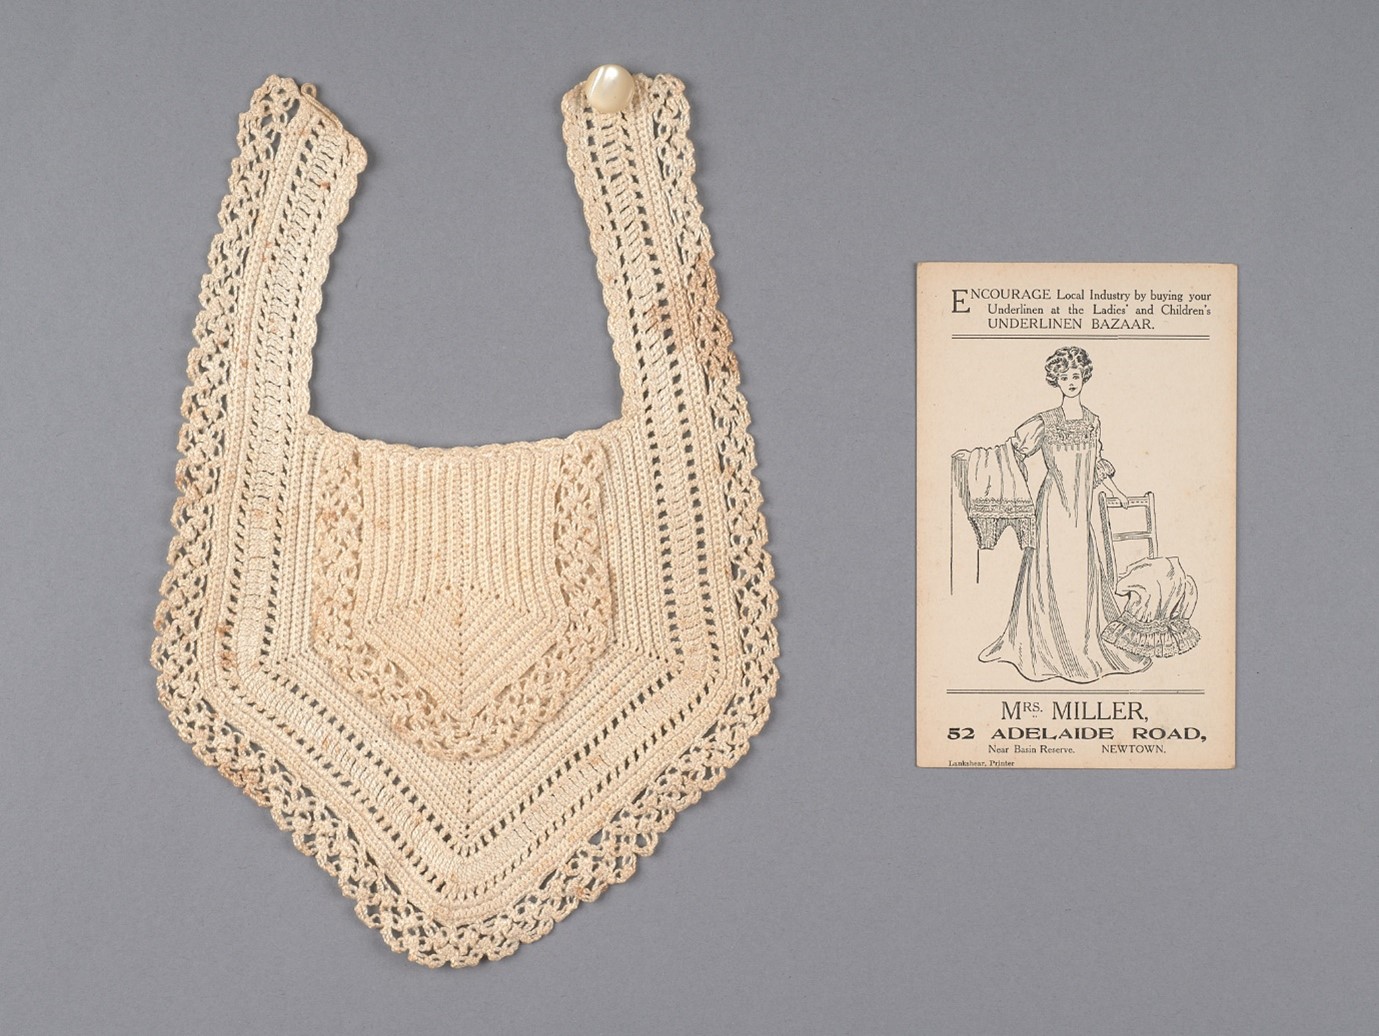 A bib made by Laura for her grand-daughter Audrey Inkersell, alongside an example of her advertising material